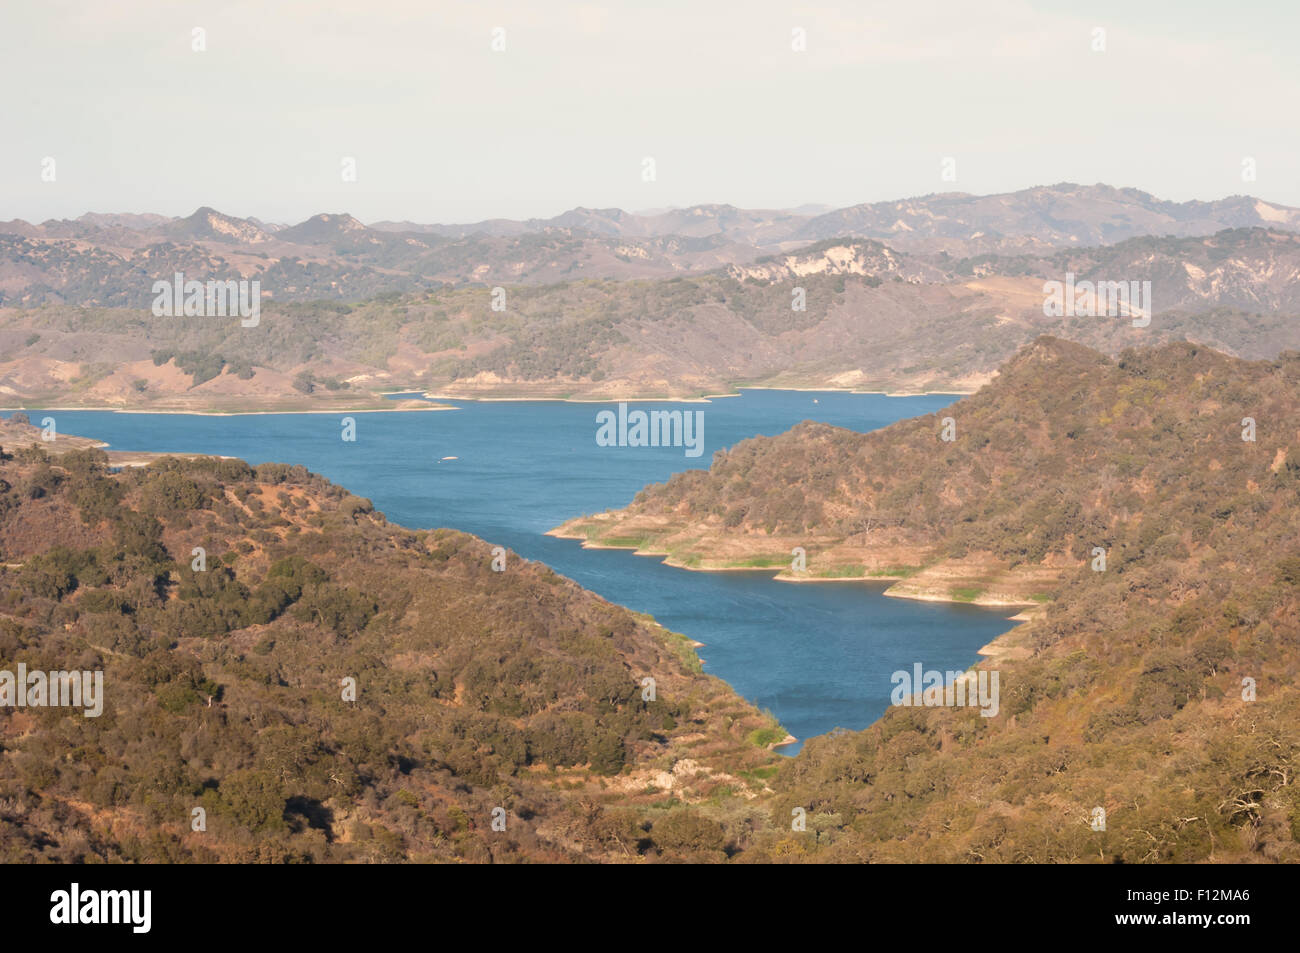 Elevated view of Lake Casitas with low water level Stock Photo